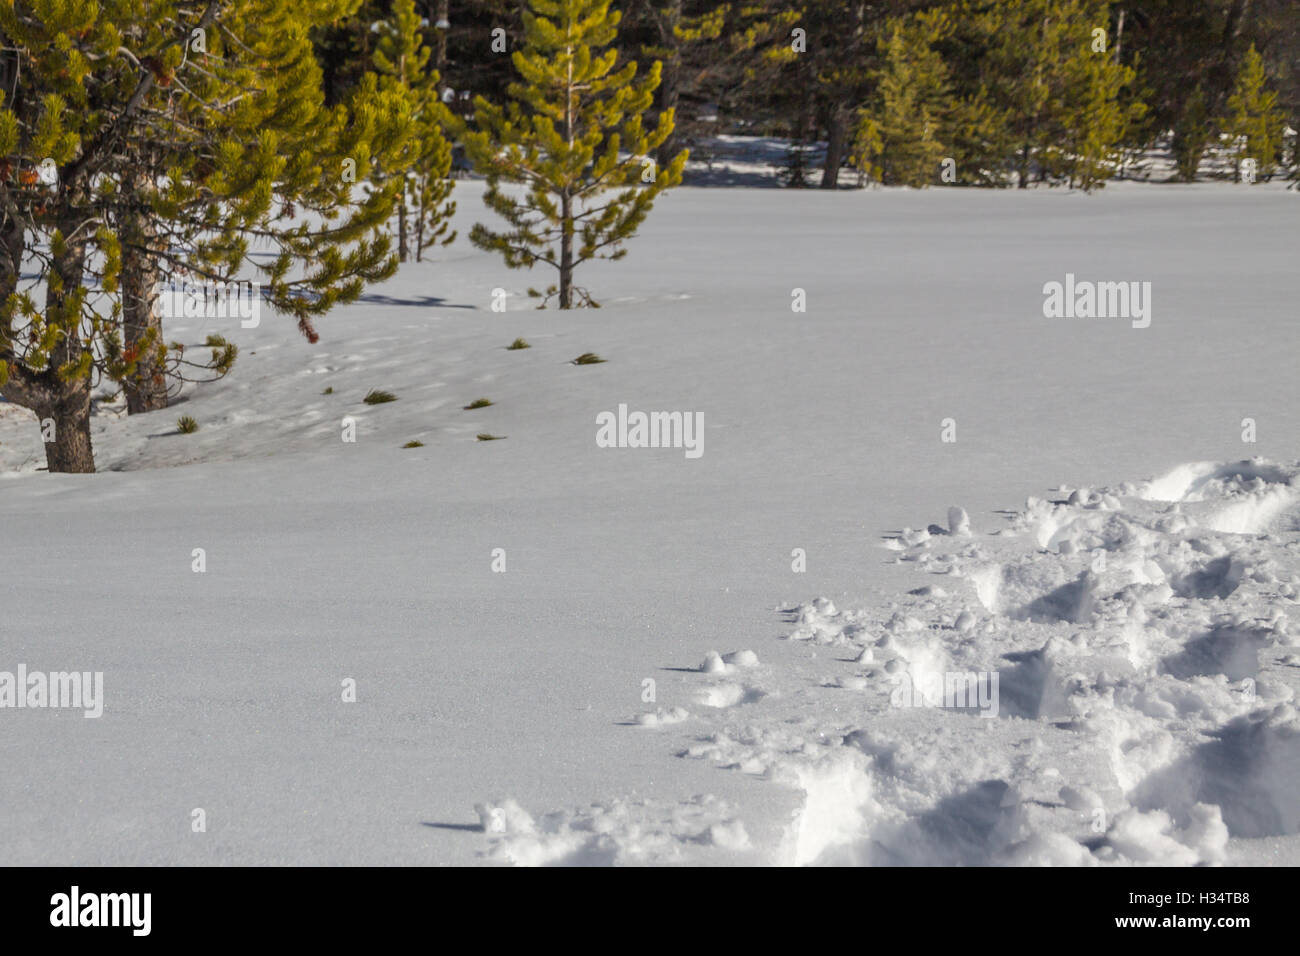 A diagonal band of fresh untouched snow for copy and text cuts diagonally across this image, bordered by snowshoe tracks, forest Stock Photo